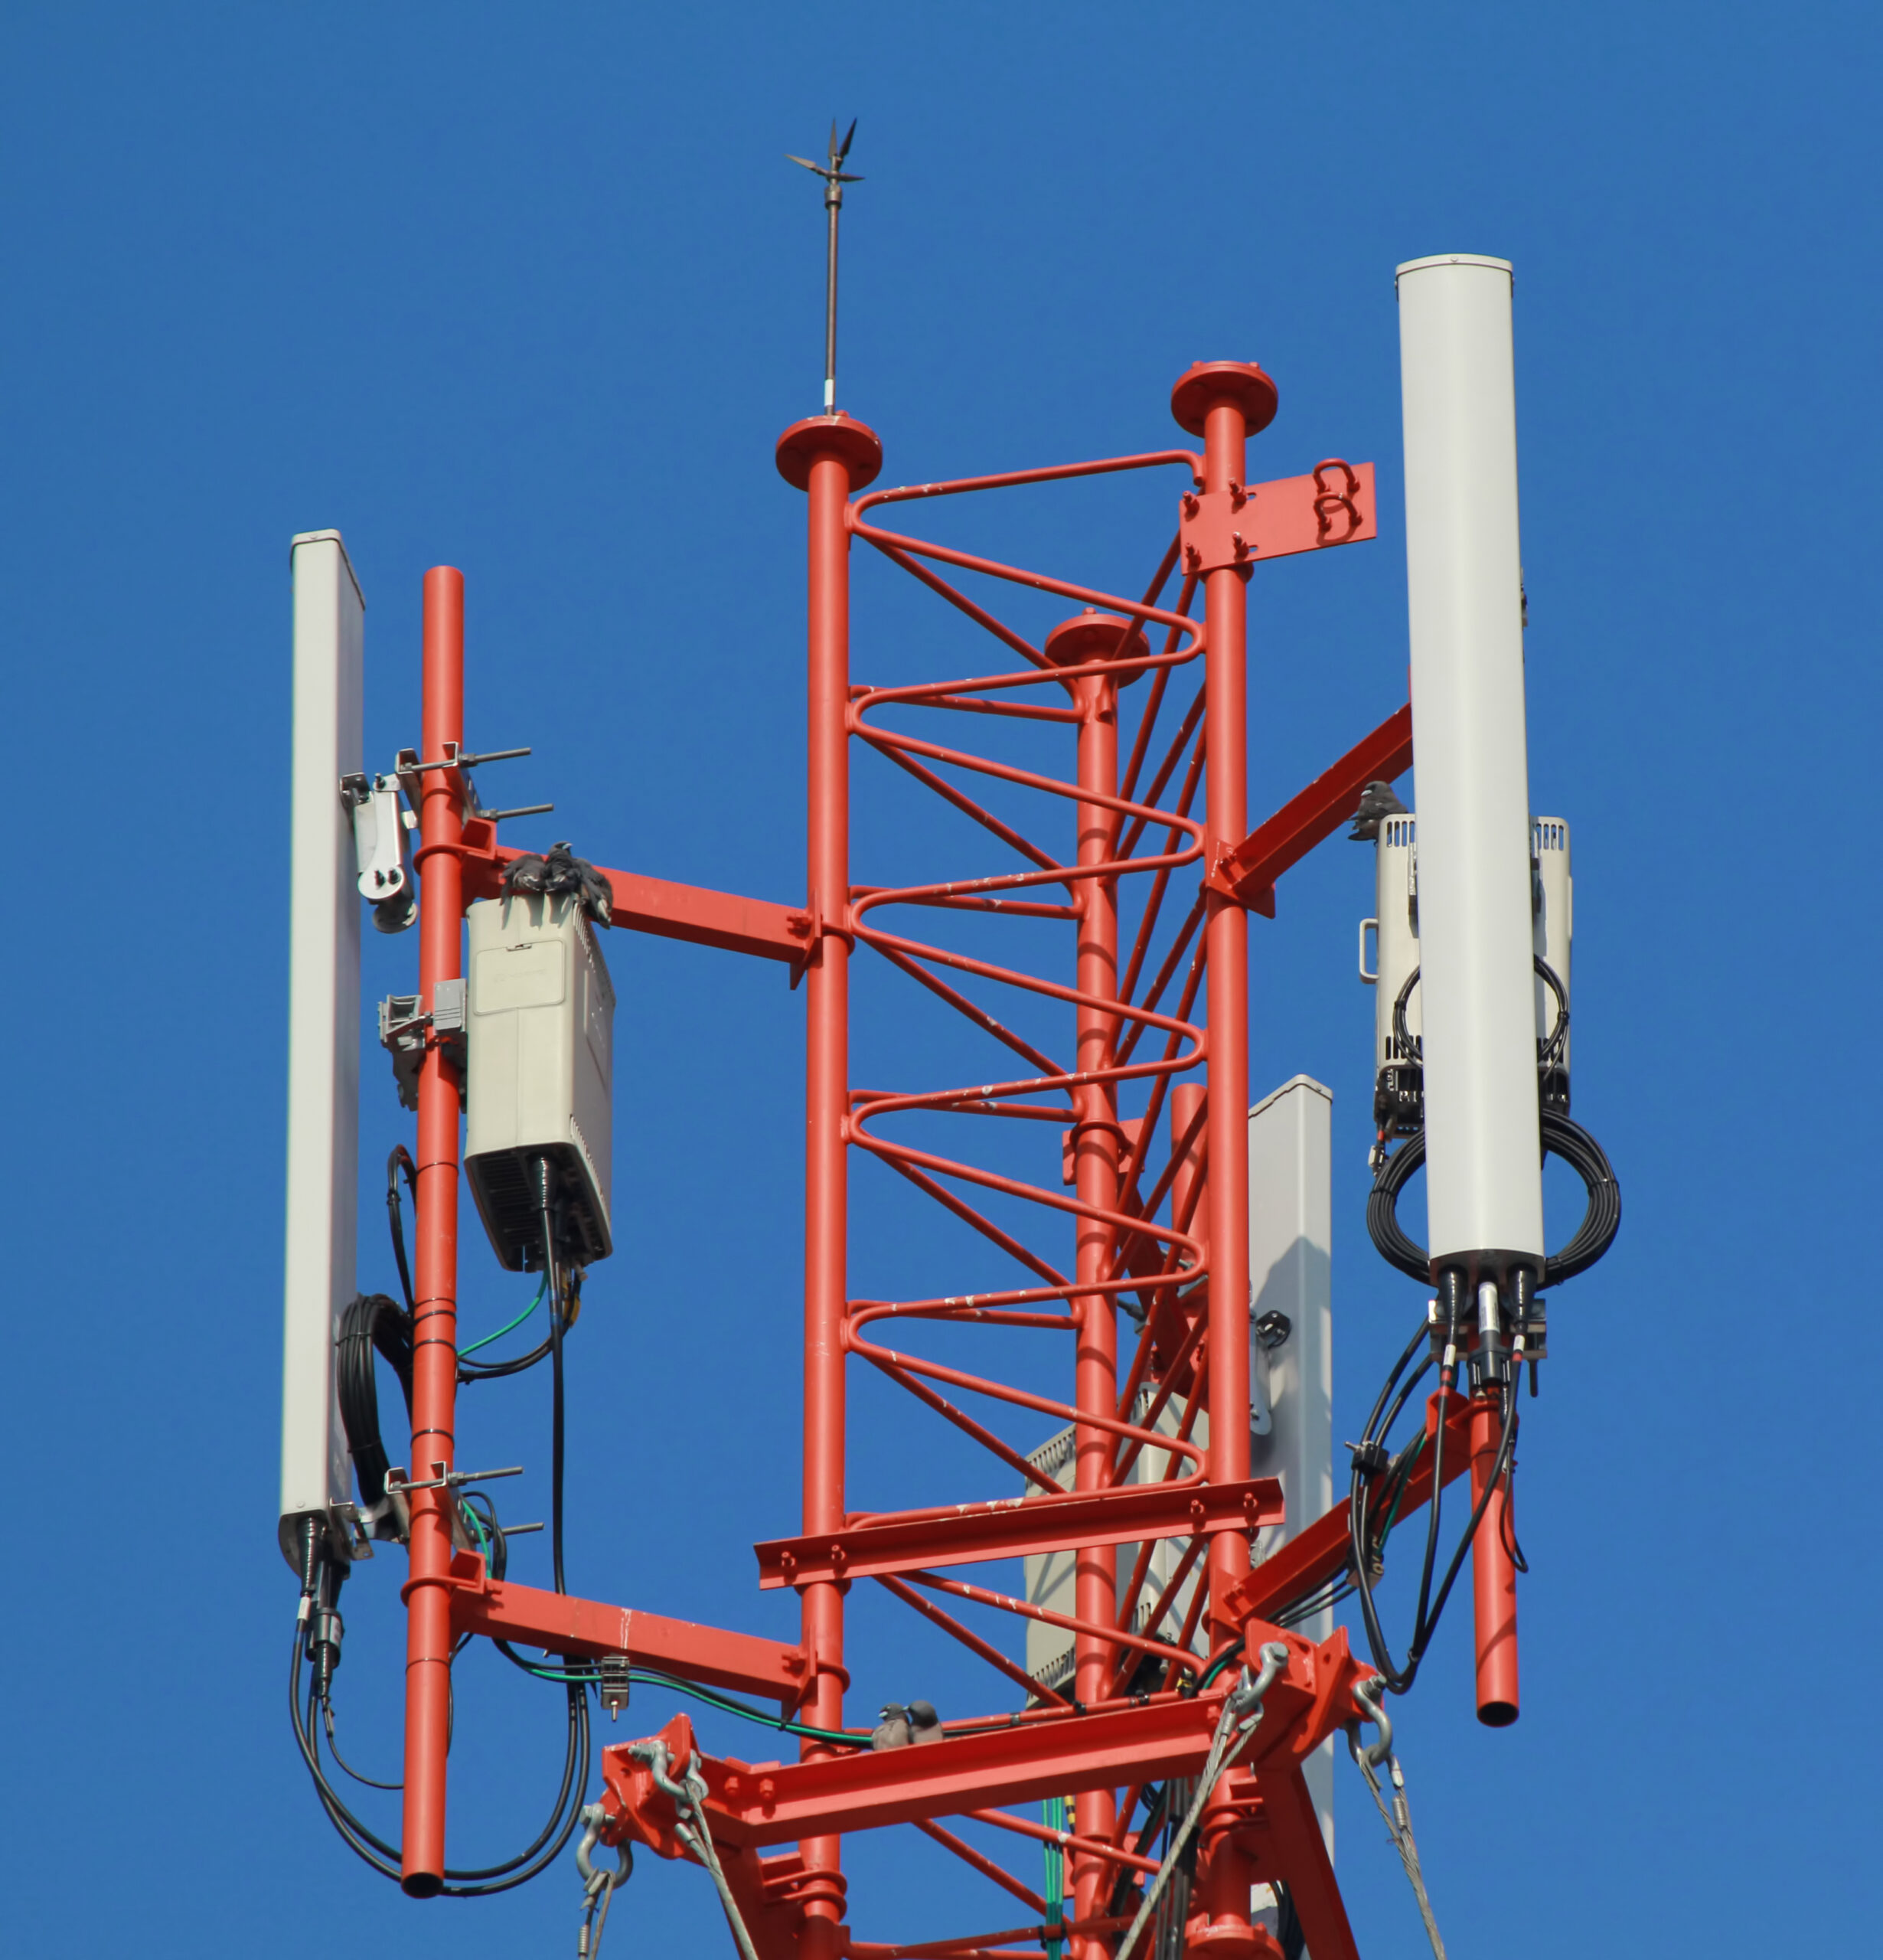 Distributed Antenna Systems